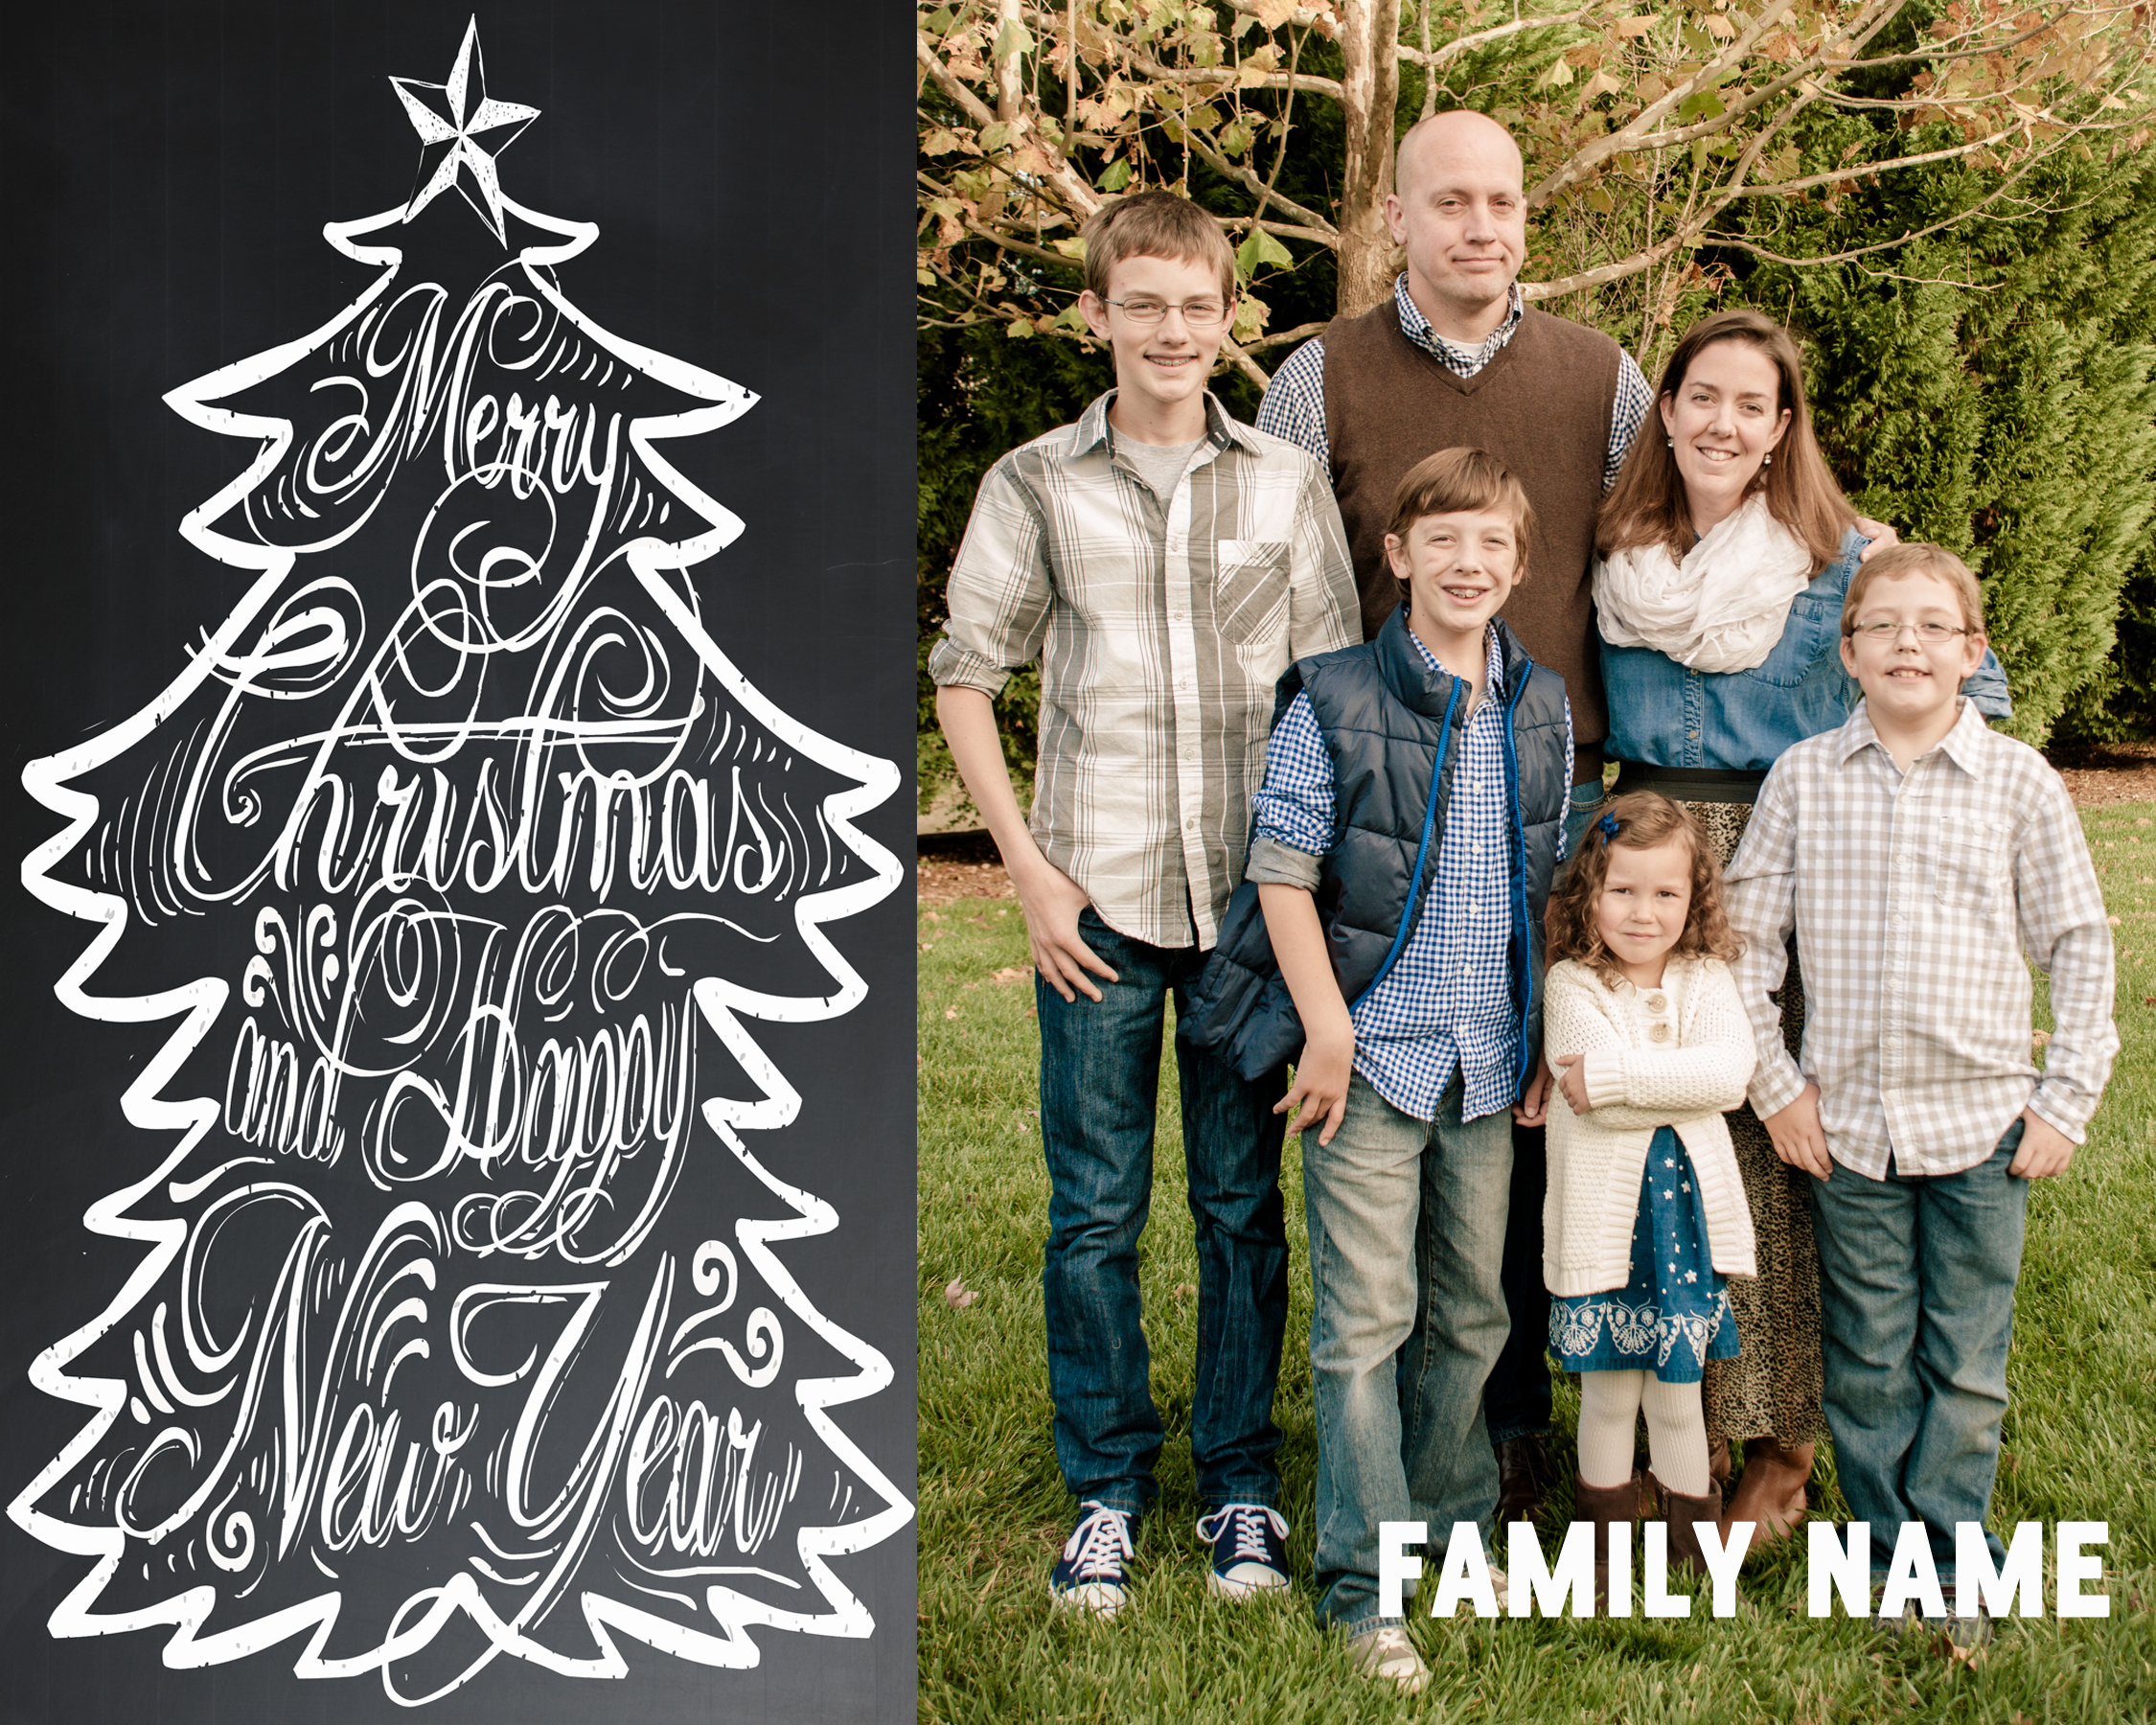 Free Chalkboard Christmas Card Download Ideas! « Goodncrazy With Regard To Free Christmas Card Templates For Photoshop